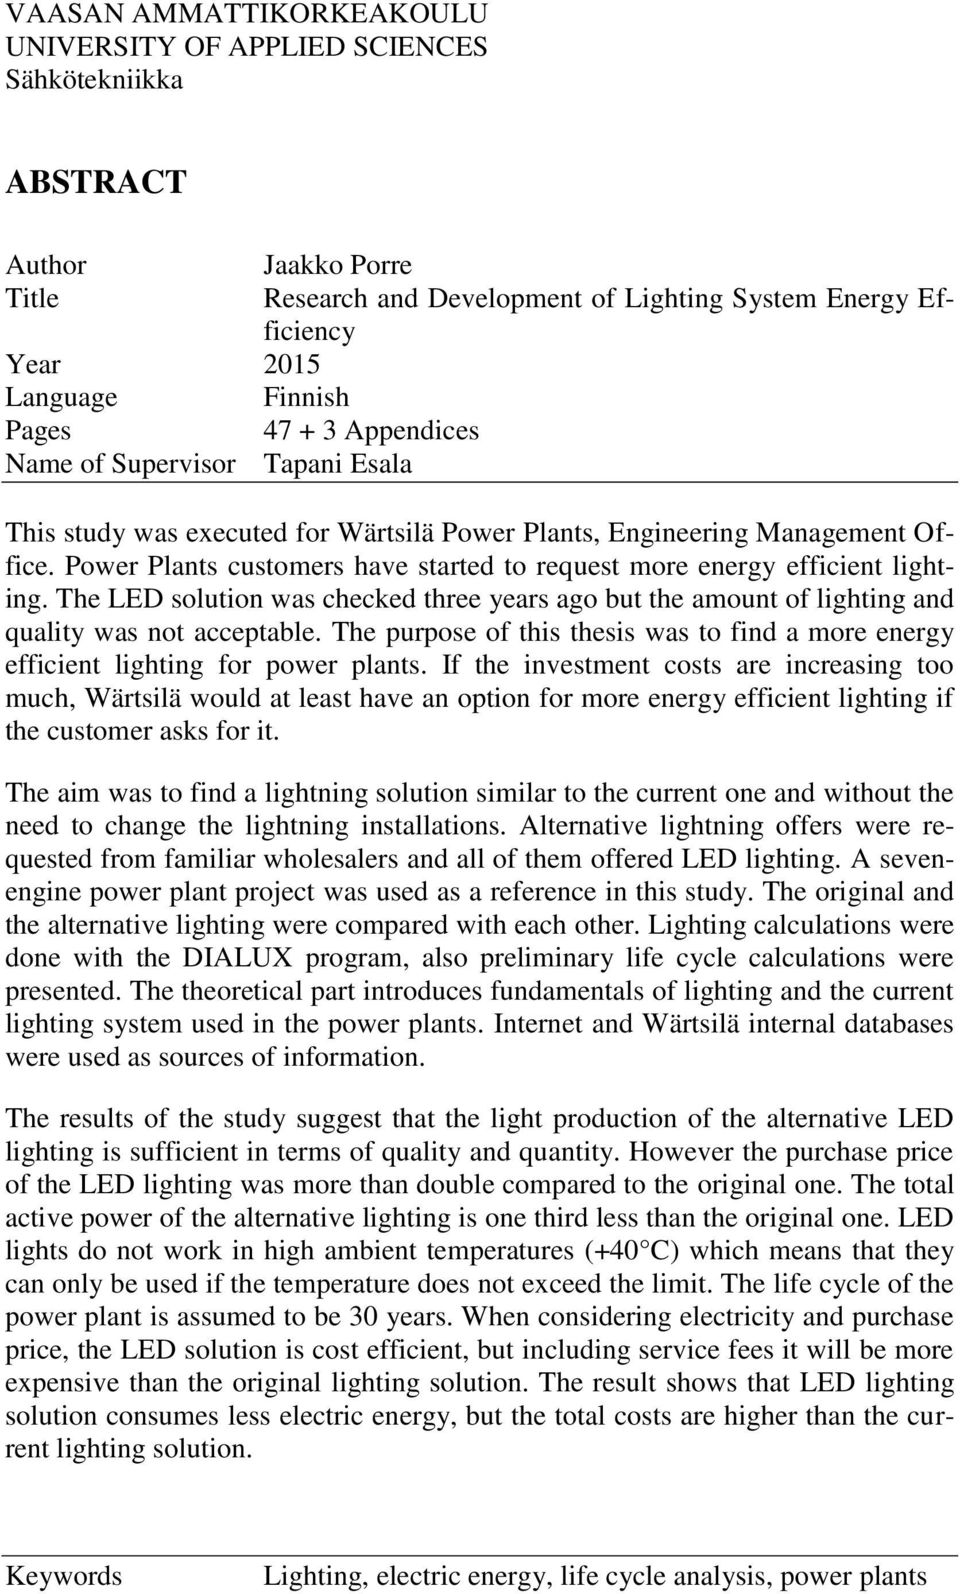 Power Plants customers have started to request more energy efficient lighting. The LED solution was checked three years ago but the amount of lighting and quality was not acceptable.